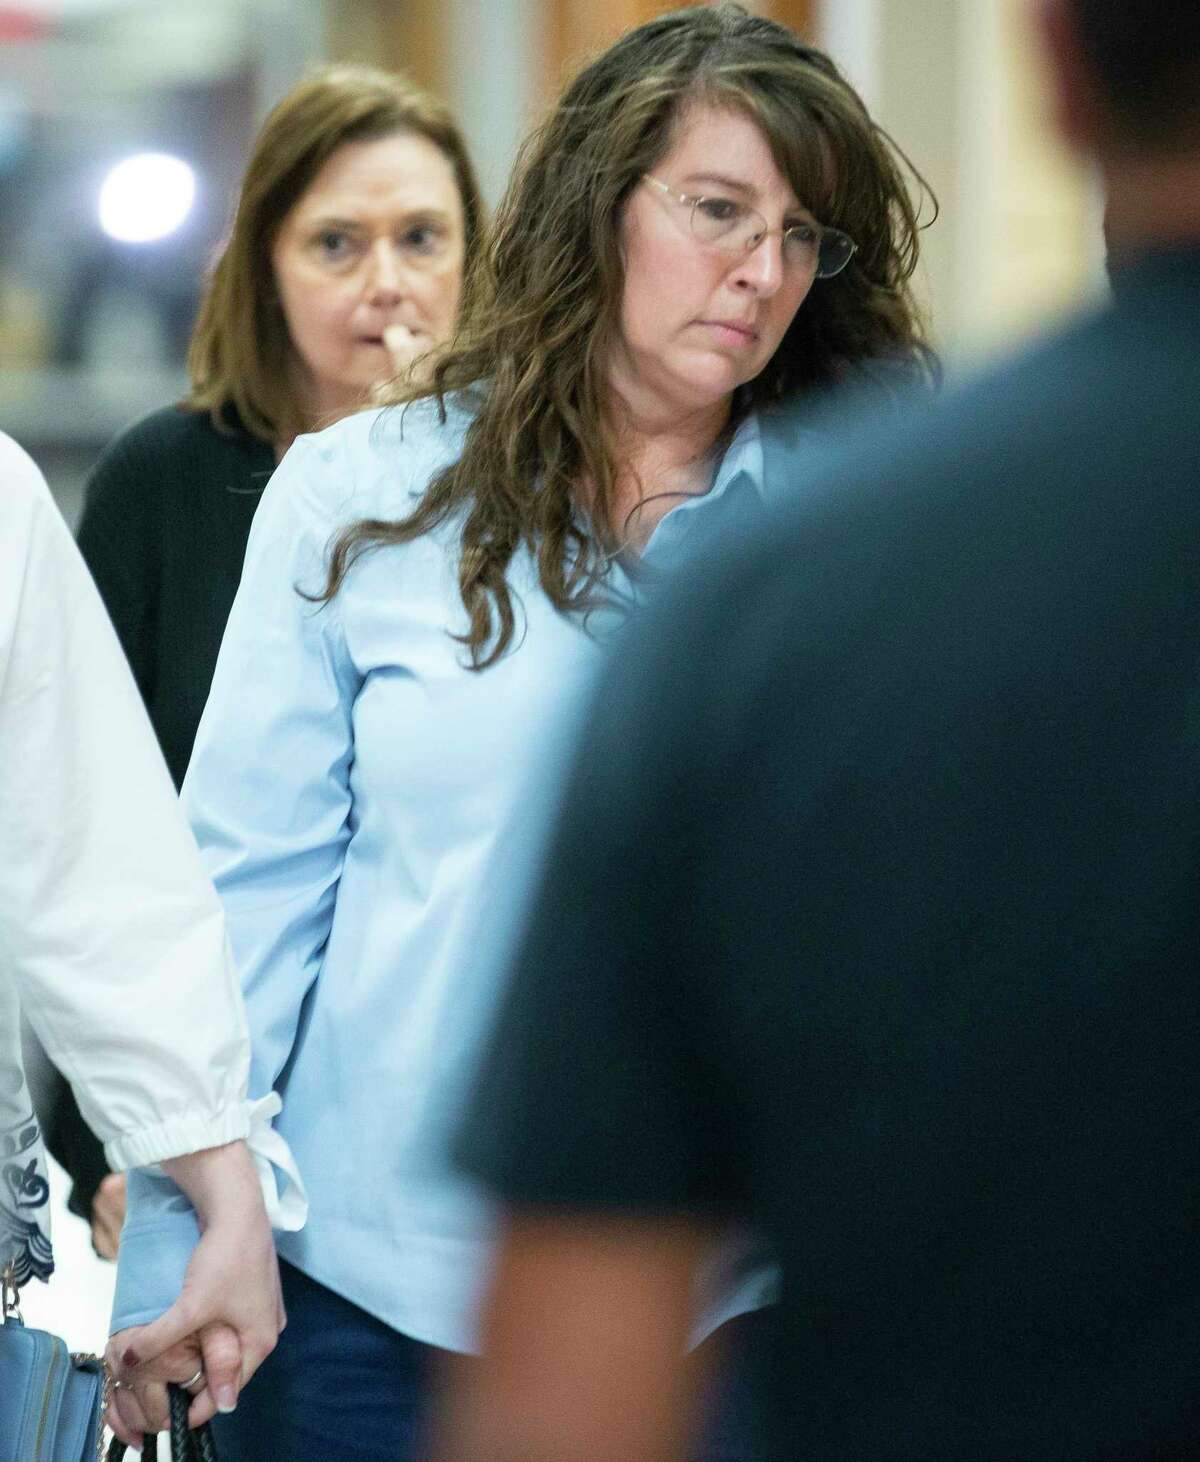 Chauna Thompson walks back into the courtroom after learning that a jury agreed on a 25-year prison sentence for her husband, Terry Thompson, for the choking death of John Hernandez during a sentencing hearing at Harris County Criminal Court, Wednesday, Nov. 7, 2018 in Houston. Thompson was with his wife, former deputy Chauna Thompson, when they got into a fight with Hernandez. Cell phone video from the incident showed the Thompsons holding Hernandez down on the ground.